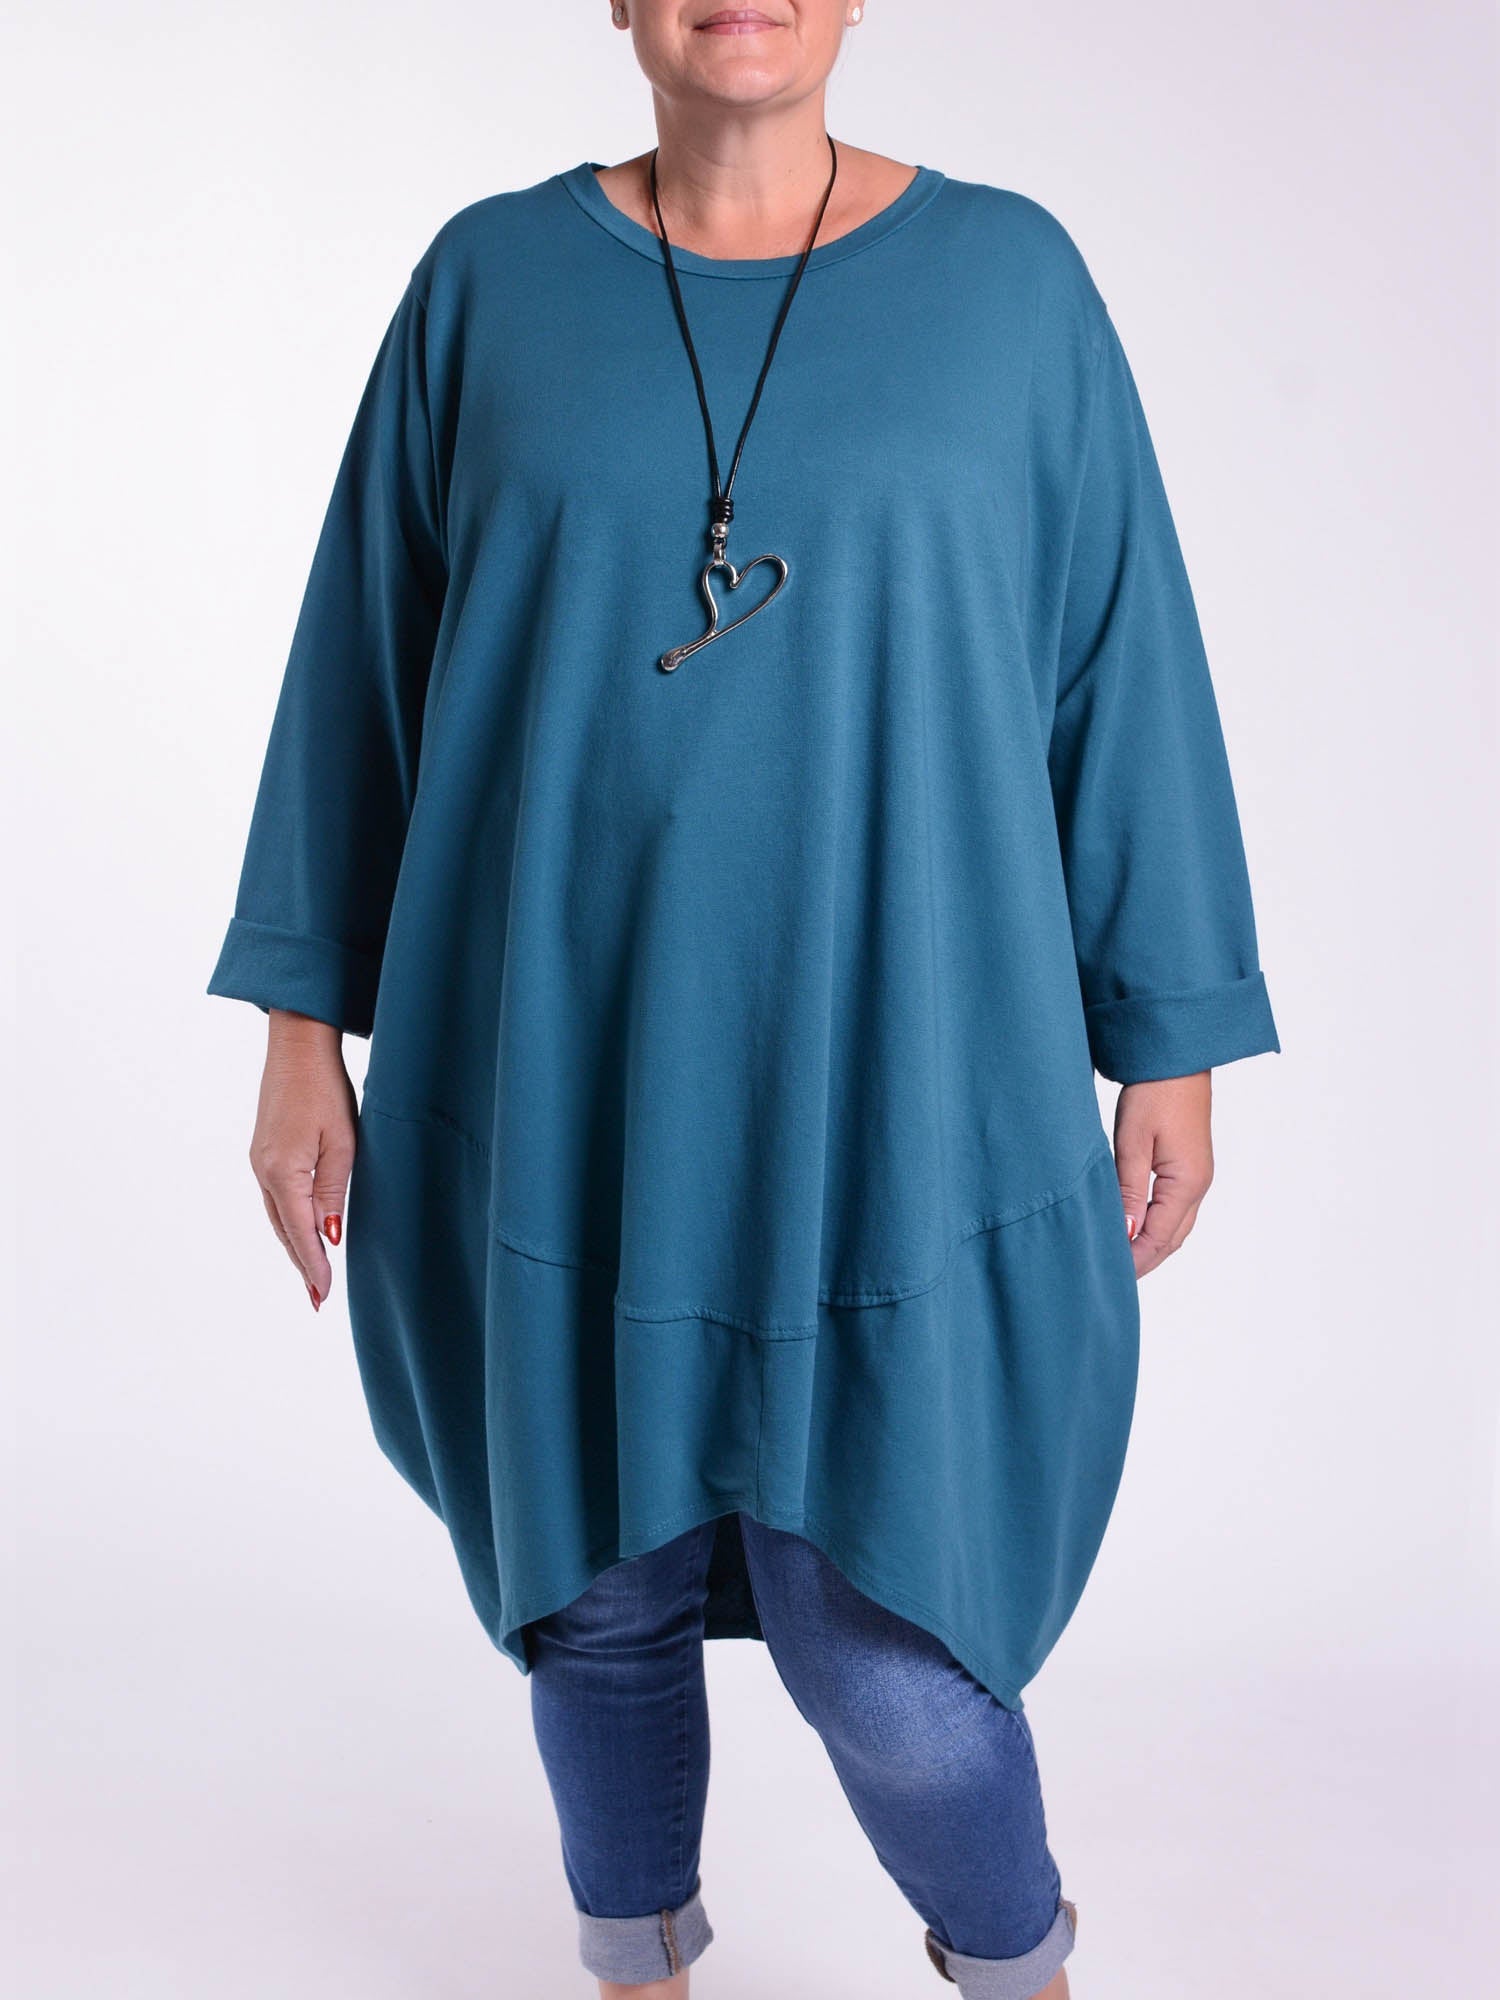 Oversized Cocoon Tunic  - 10517, Tops & Shirts, Pure Plus Clothing, Lagenlook Clothing, Plus Size Fashion, Over 50 Fashion